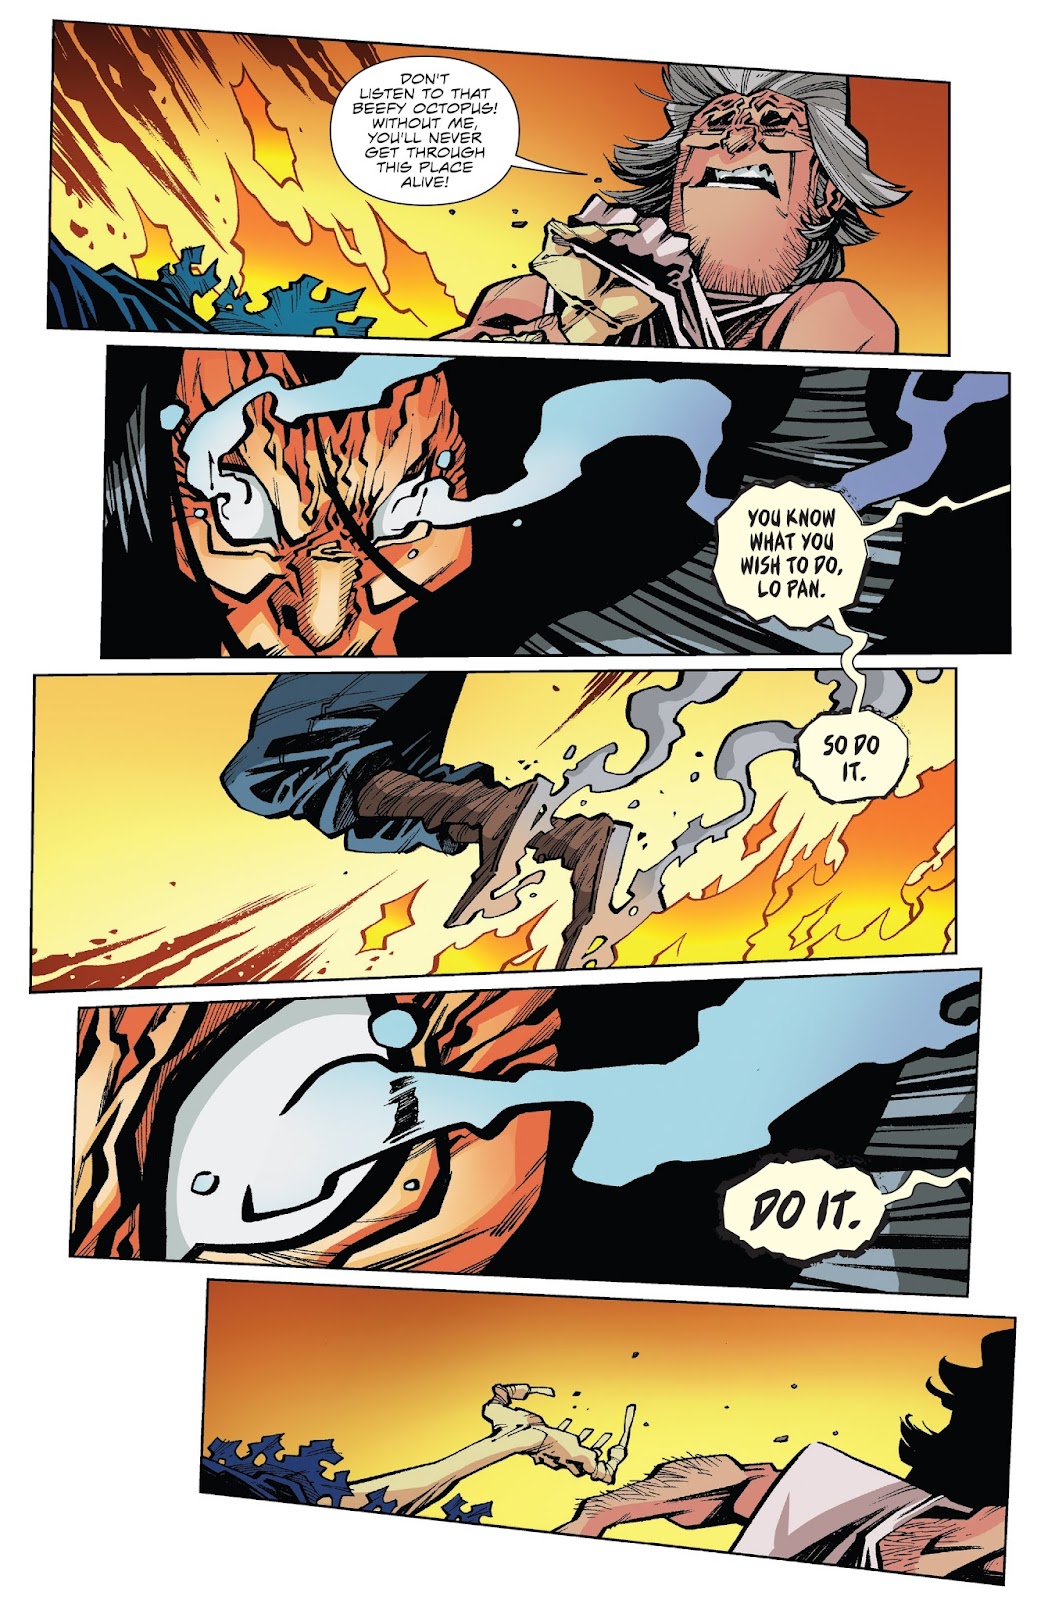 Big Trouble in Little China: Old Man Jack issue 3 - Page 23